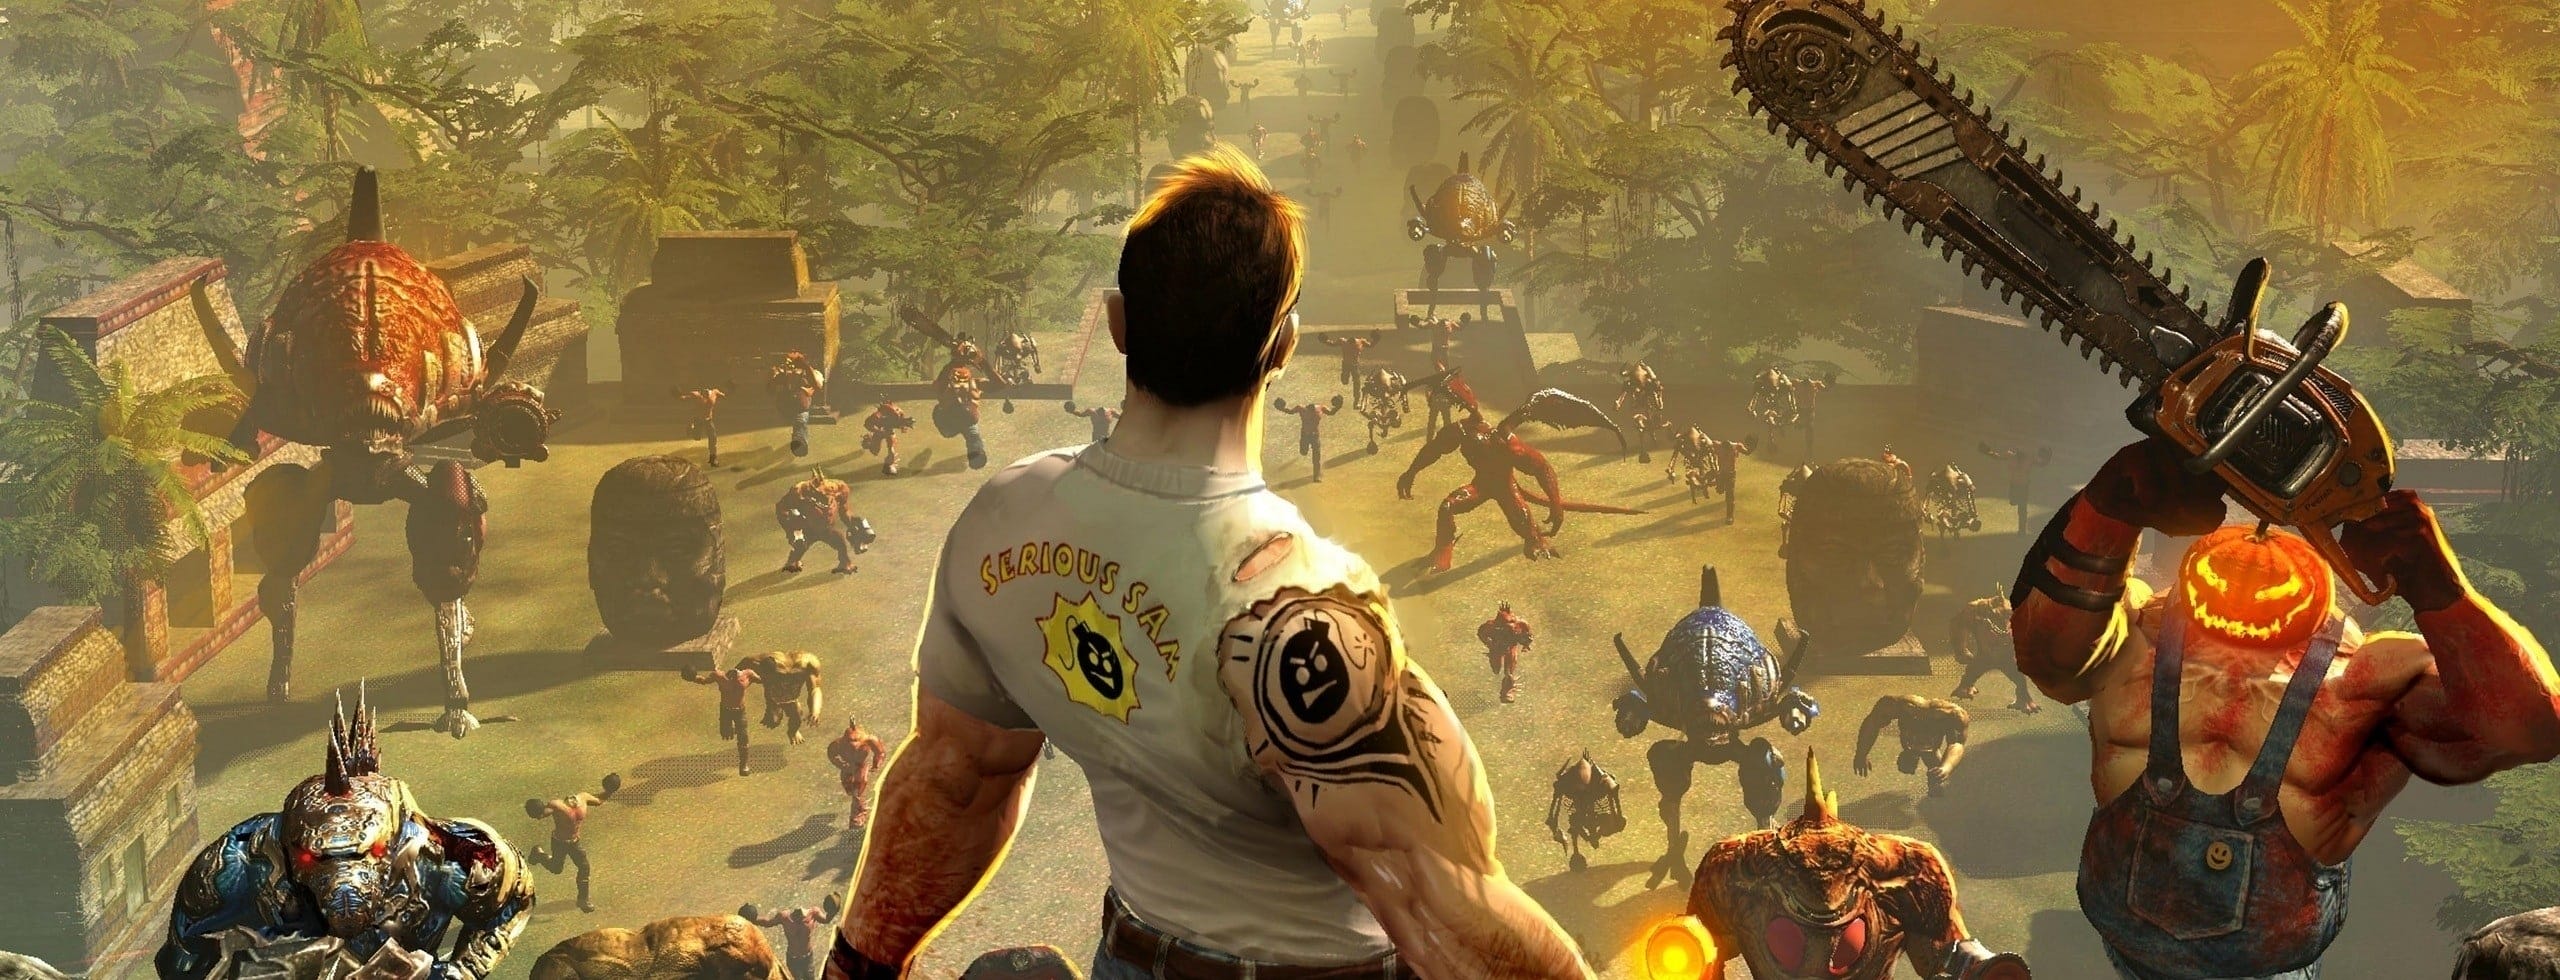 Serious Sam 4 System Requirements Revealed